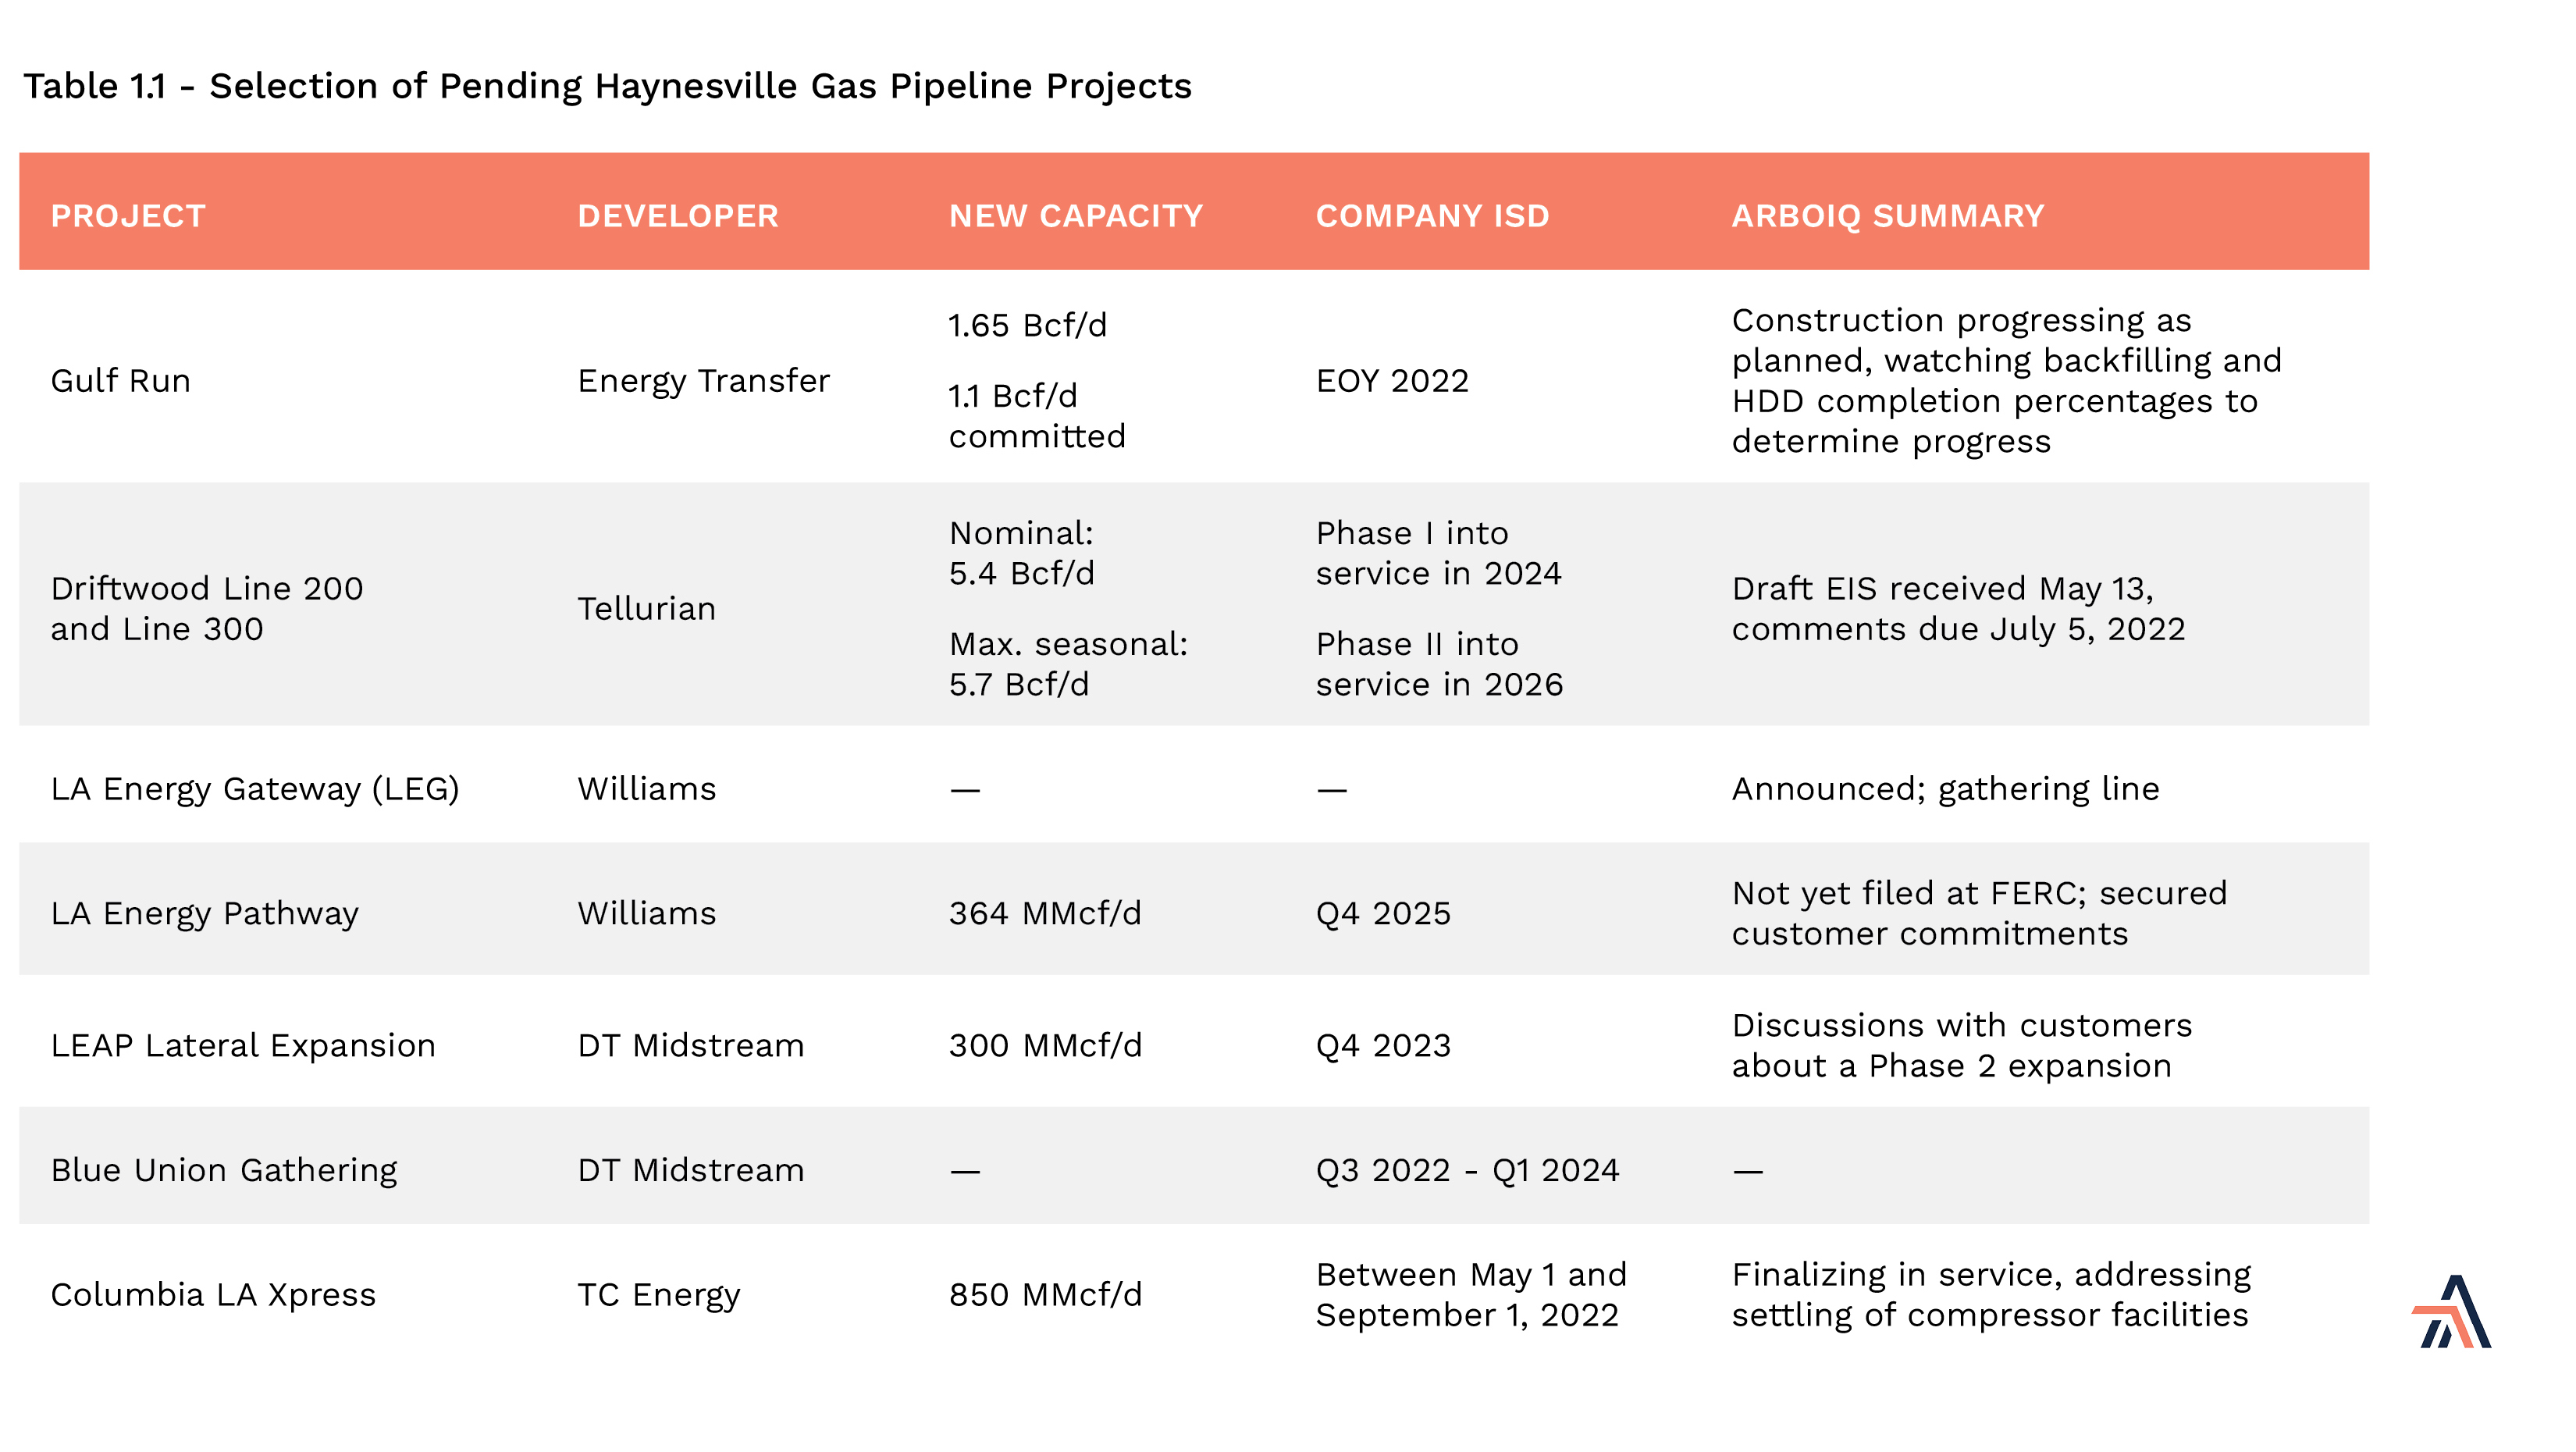 Pending Haynesville Gas Pipeline Projects